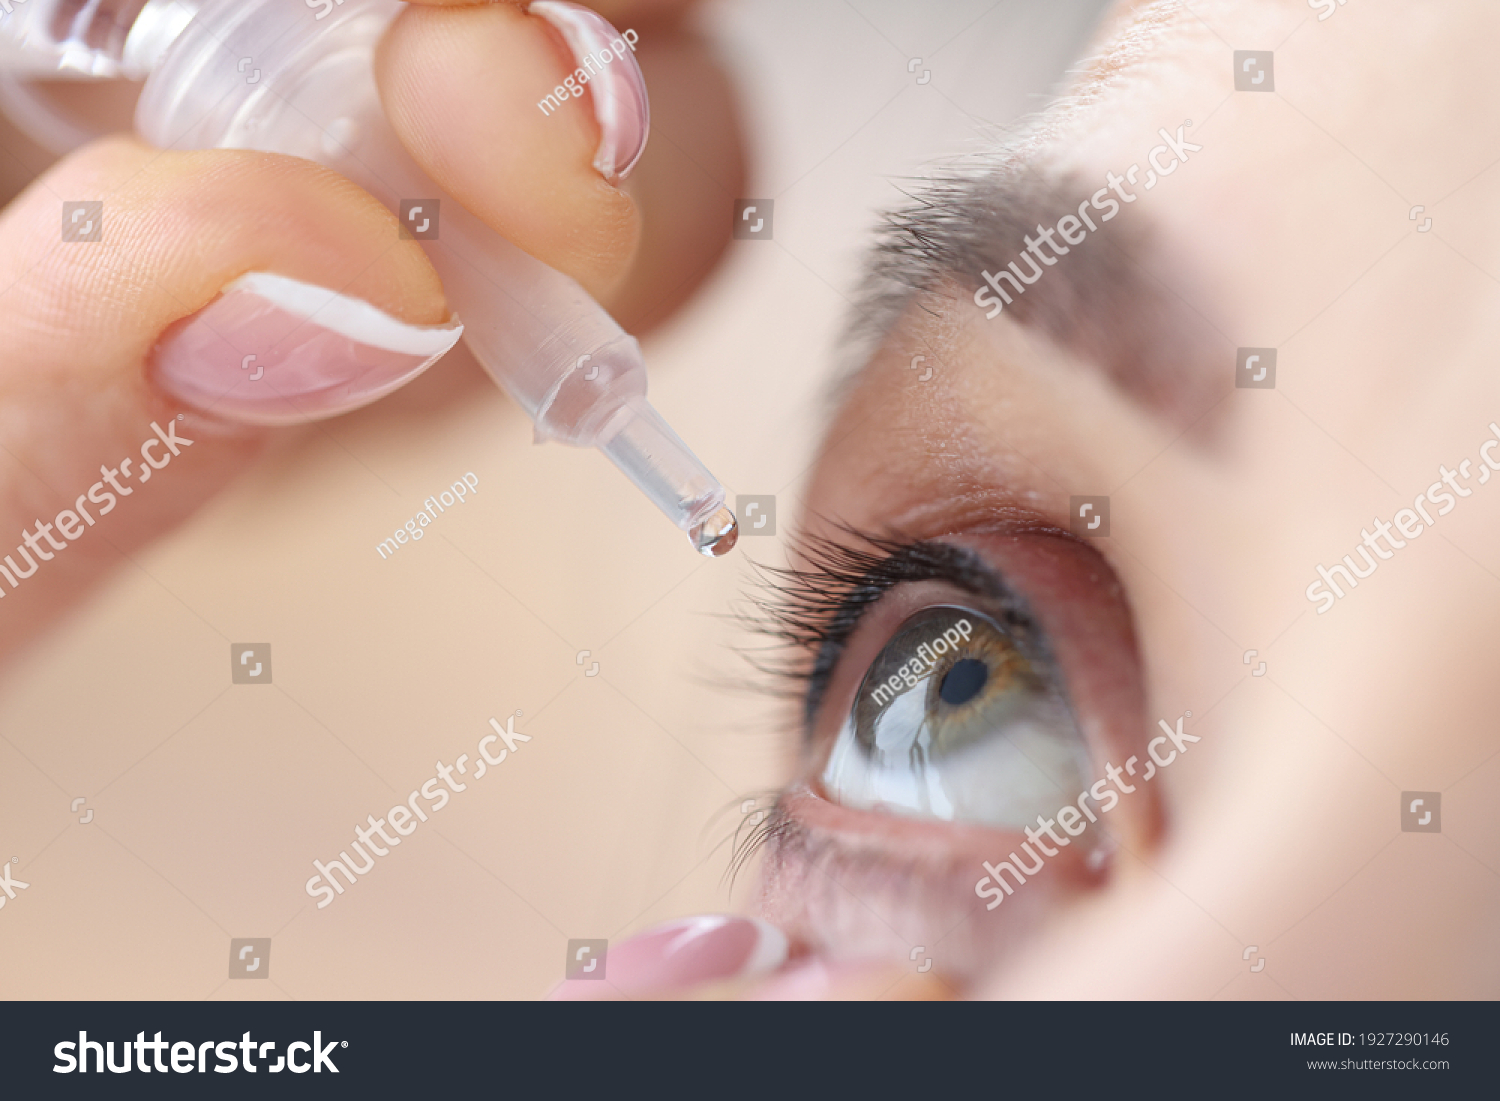 Woman drips eye drops into her eyes. Eye diseases and their treatment concept #1927290146